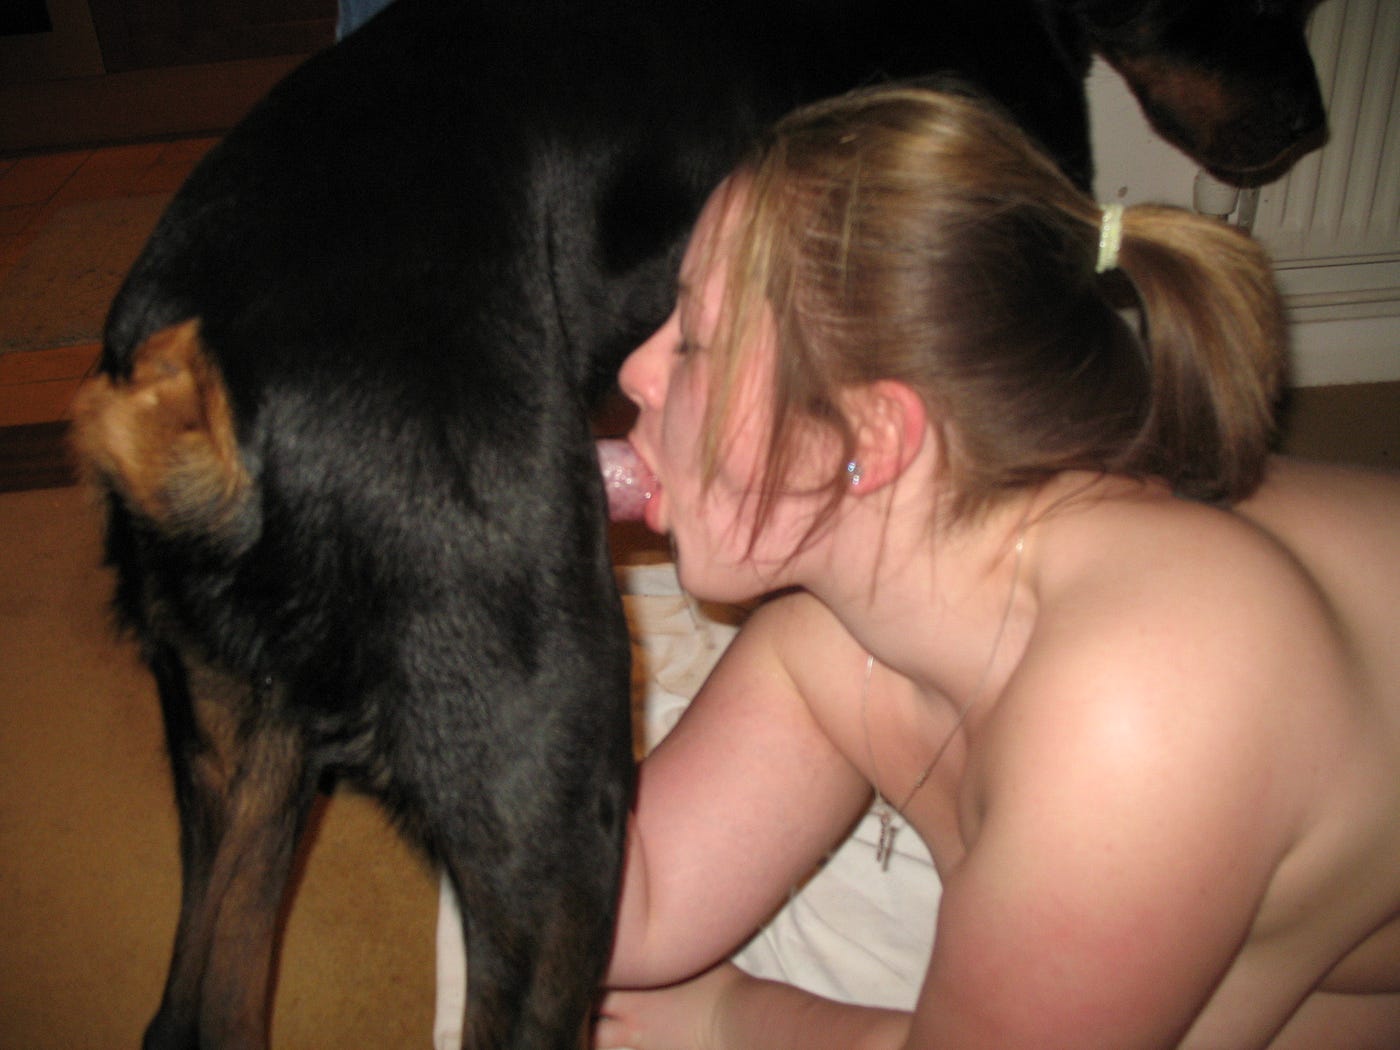 Dog sexing with woman